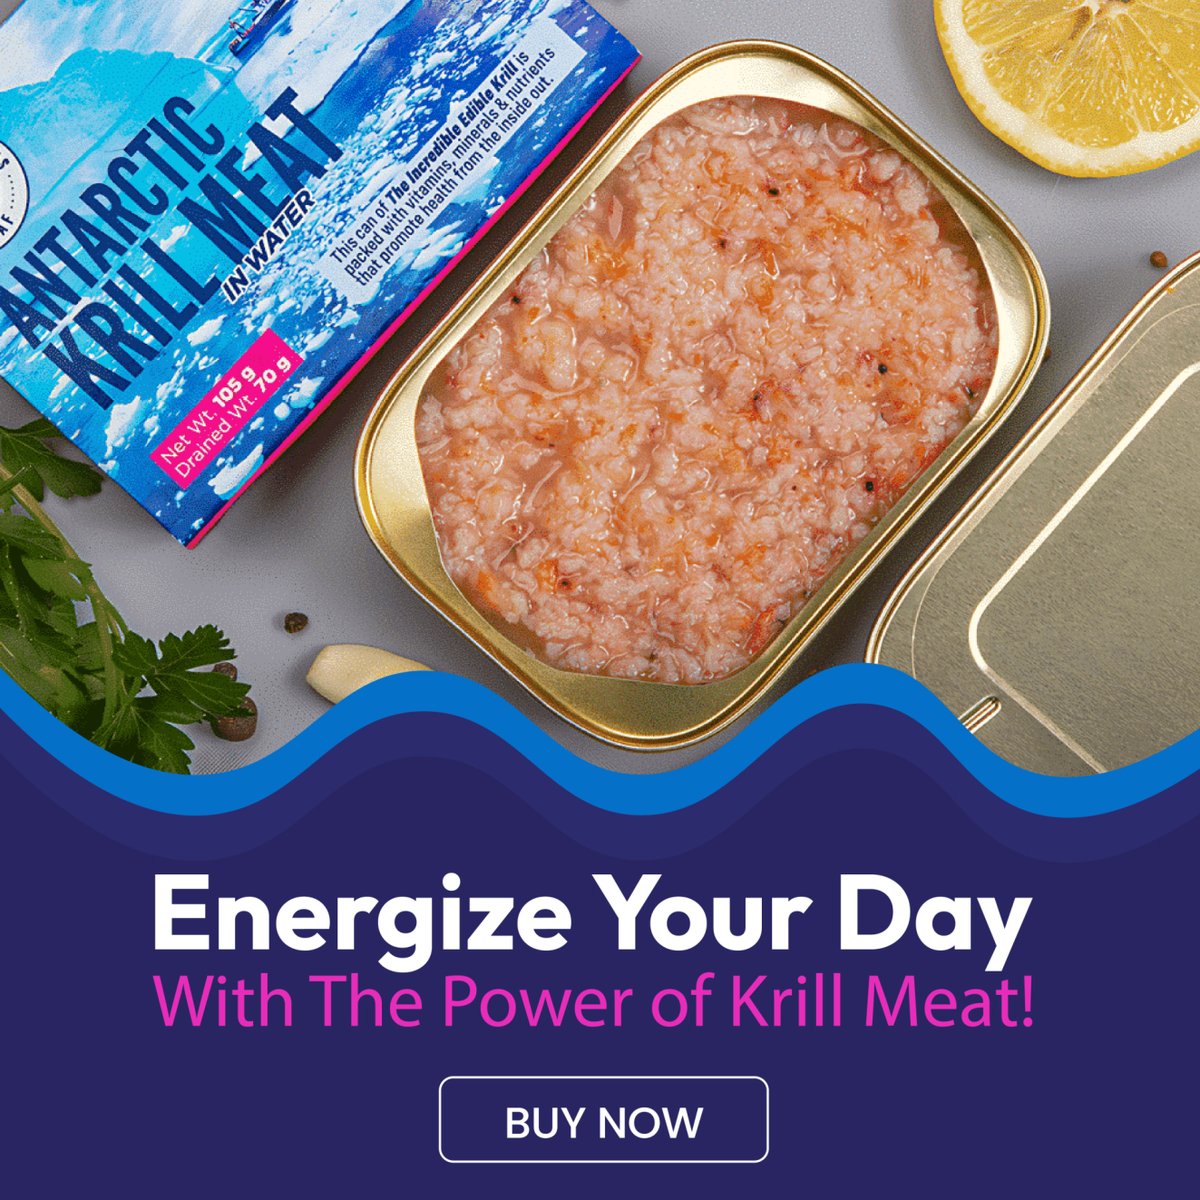 Rev up your routine with a splash of the sea! Dive into energy with Antarctic Krill Meat.

#healthyeating #pureenergy